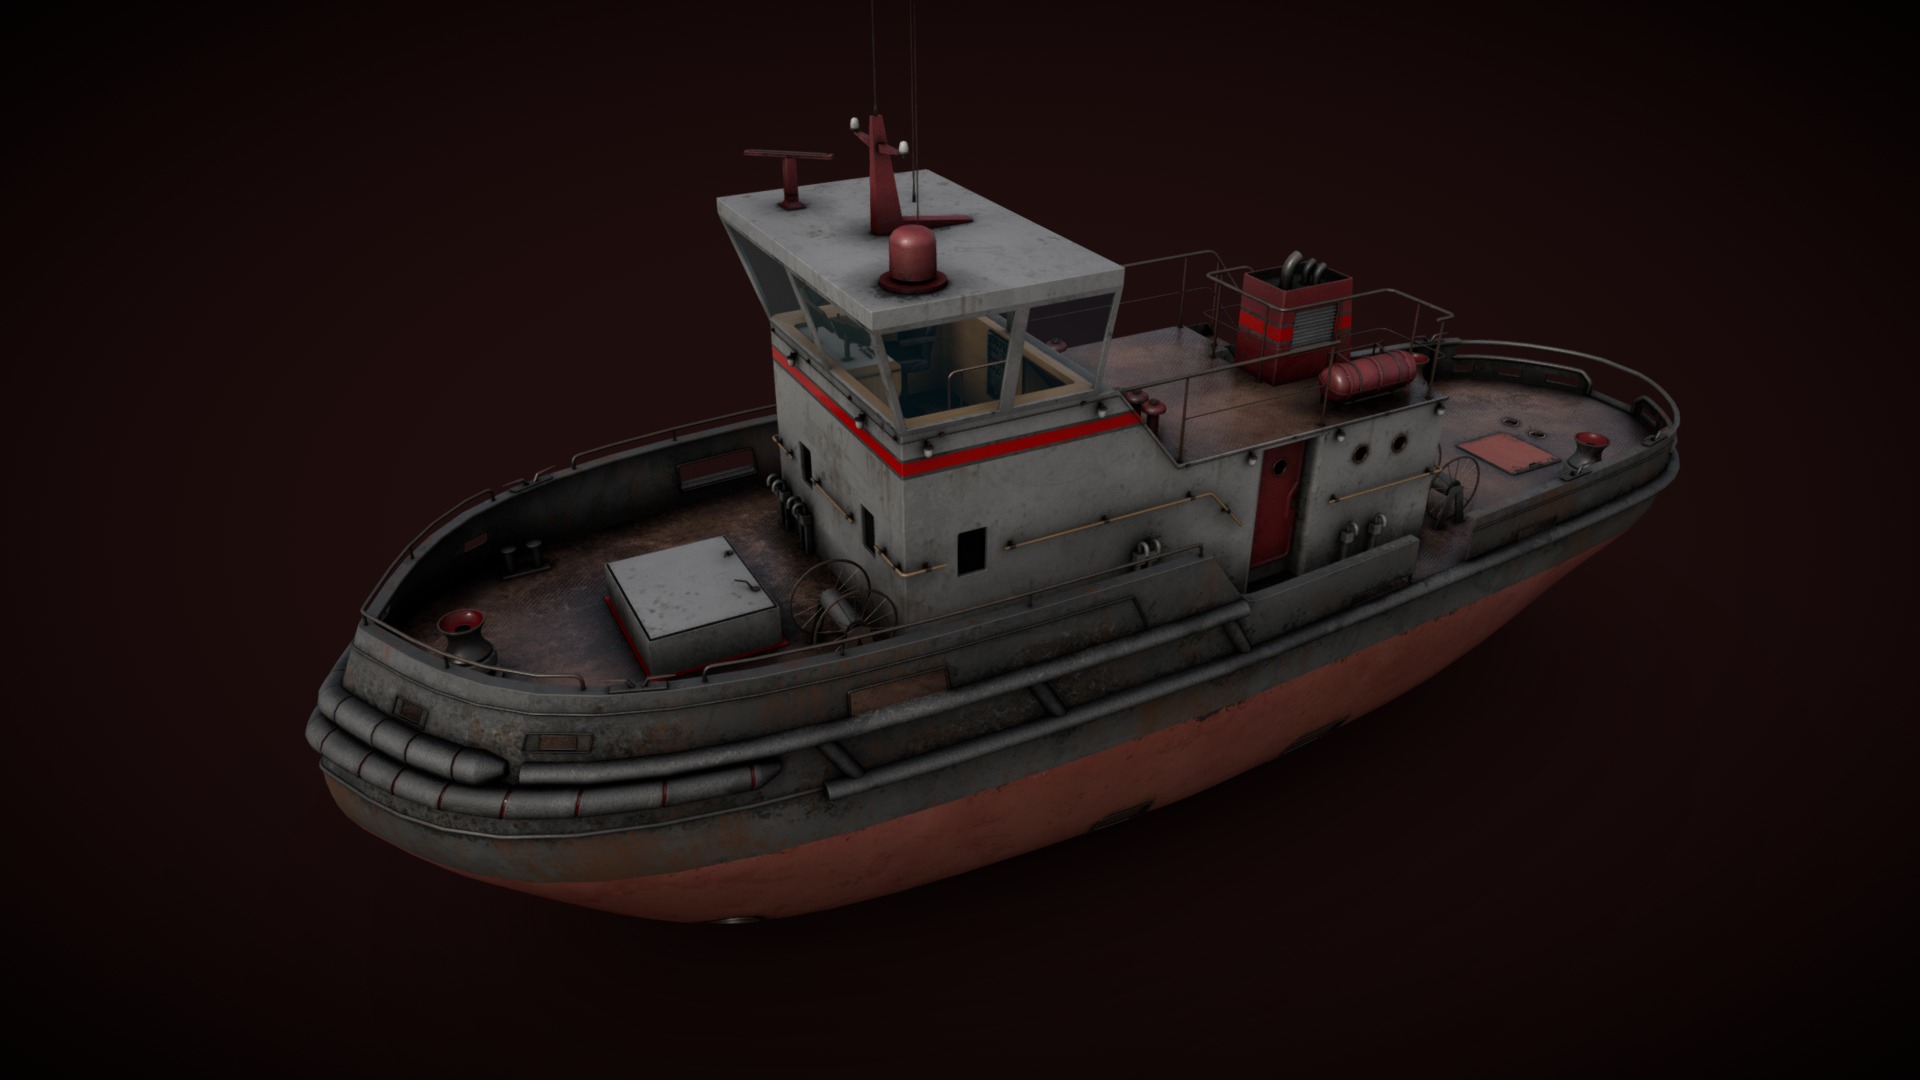 3D model Tug boat - This is a 3D model of the Tug boat. The 3D model is about a small boat on a black background.